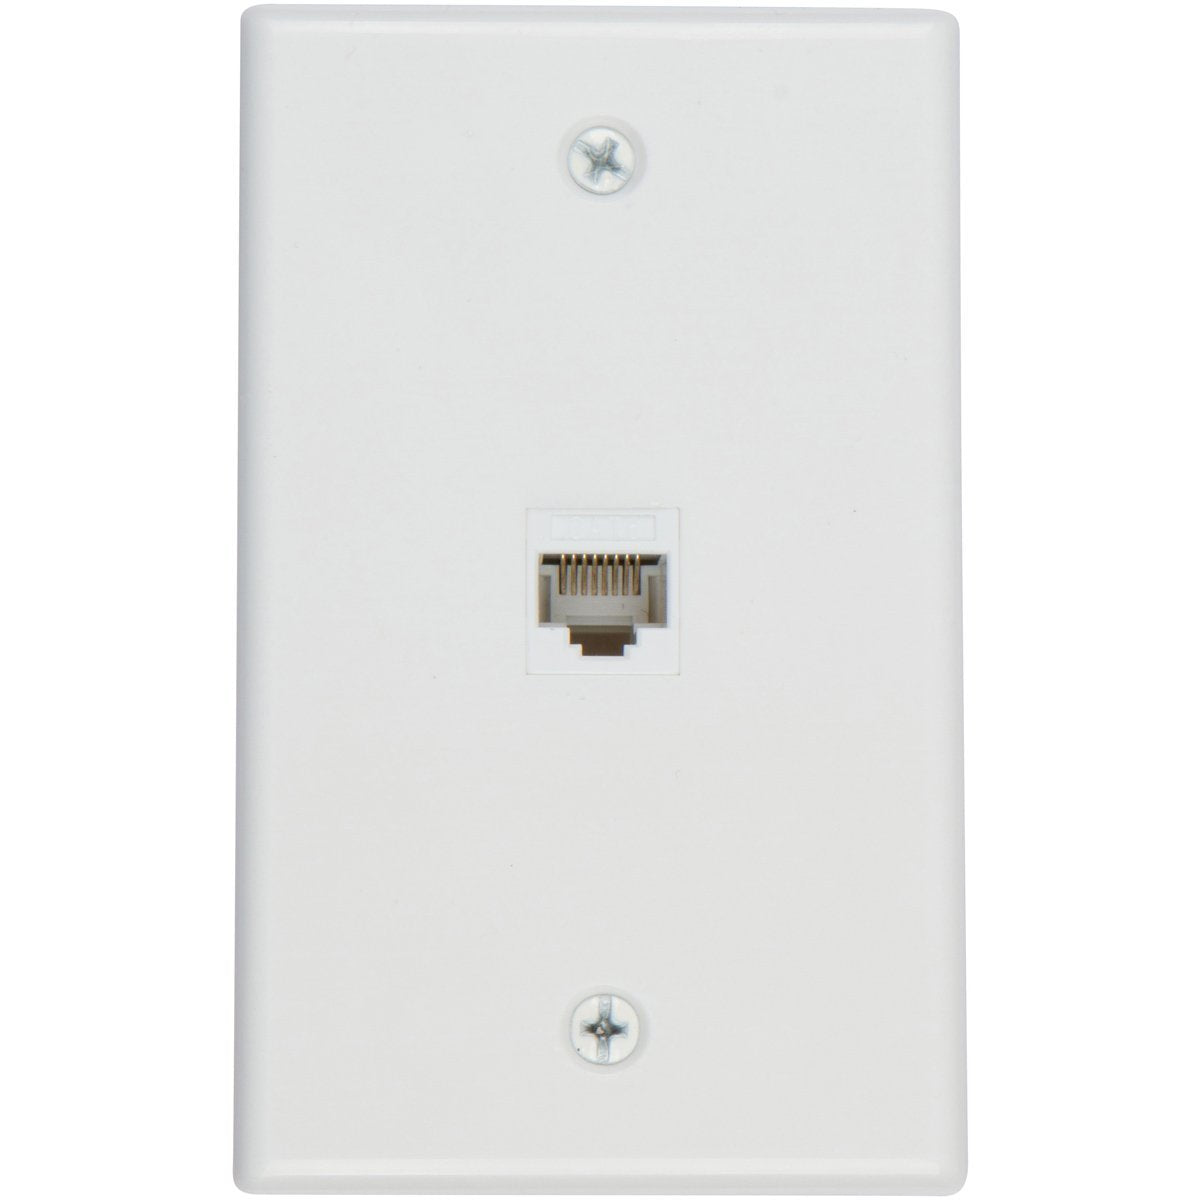 Buyer's Point 2 Port Cat6 Wall Plate, Female-Female White with Single Gang Low Voltage Mounting Bracket Device (2, 2 Port)